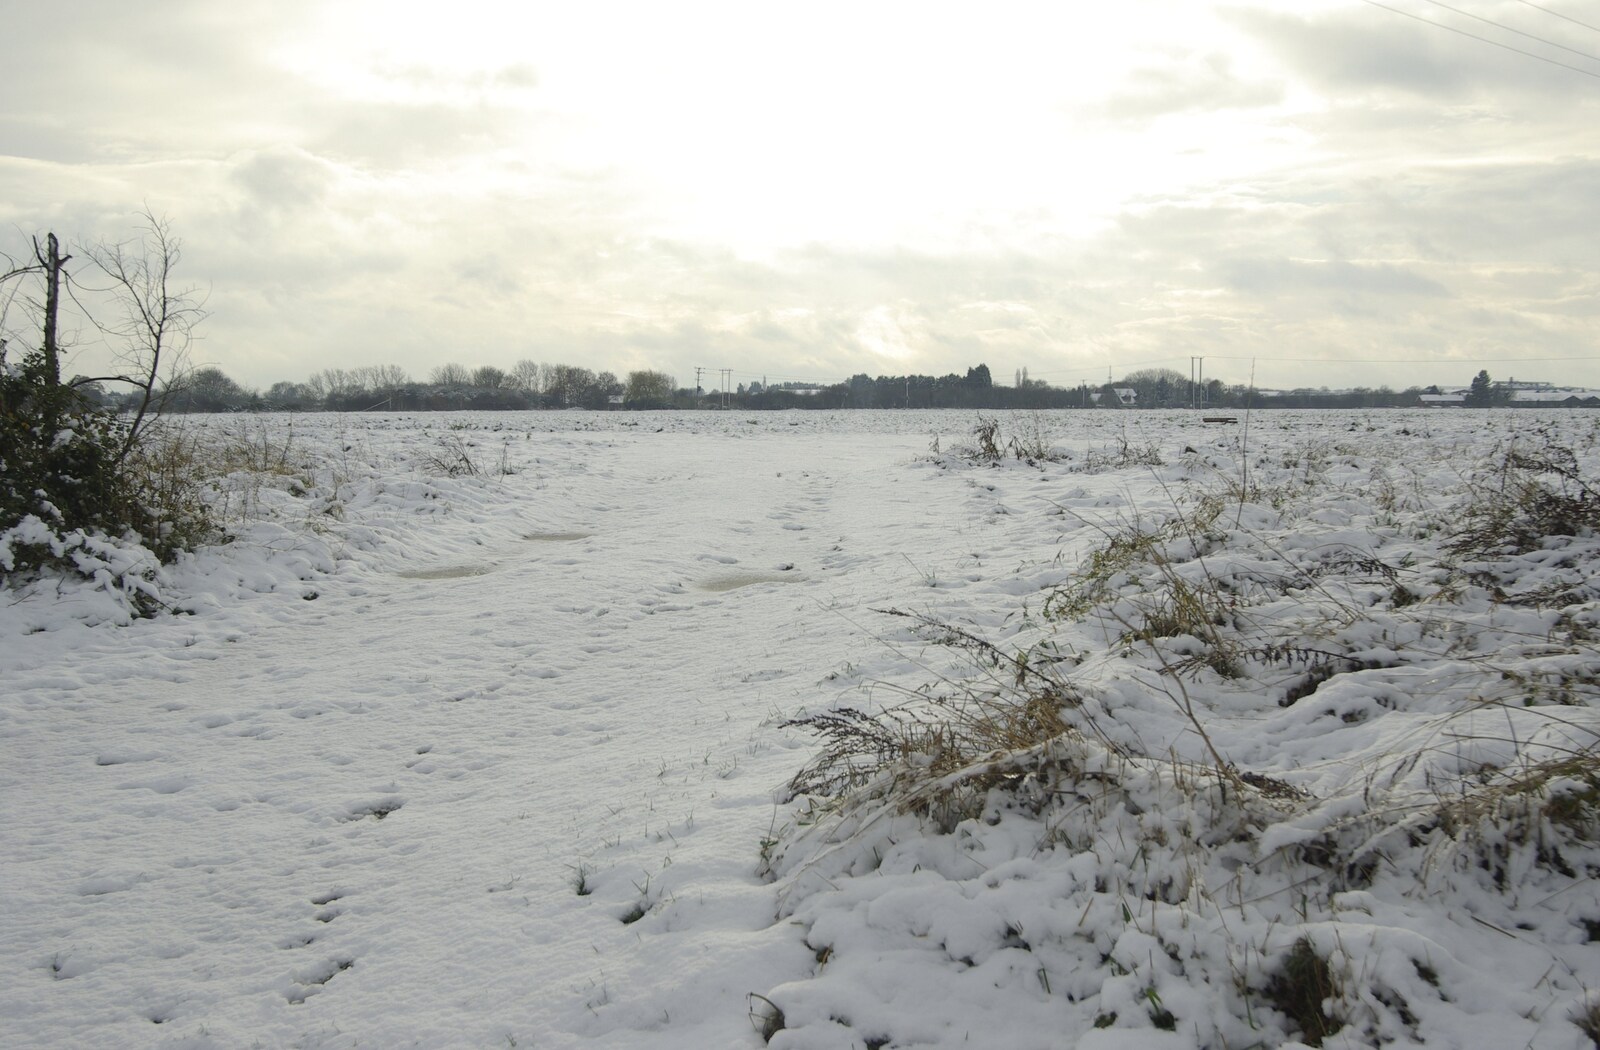 The snowy 100-acre field from Snow Days, Brome, Suffolk - 22nd November 2008